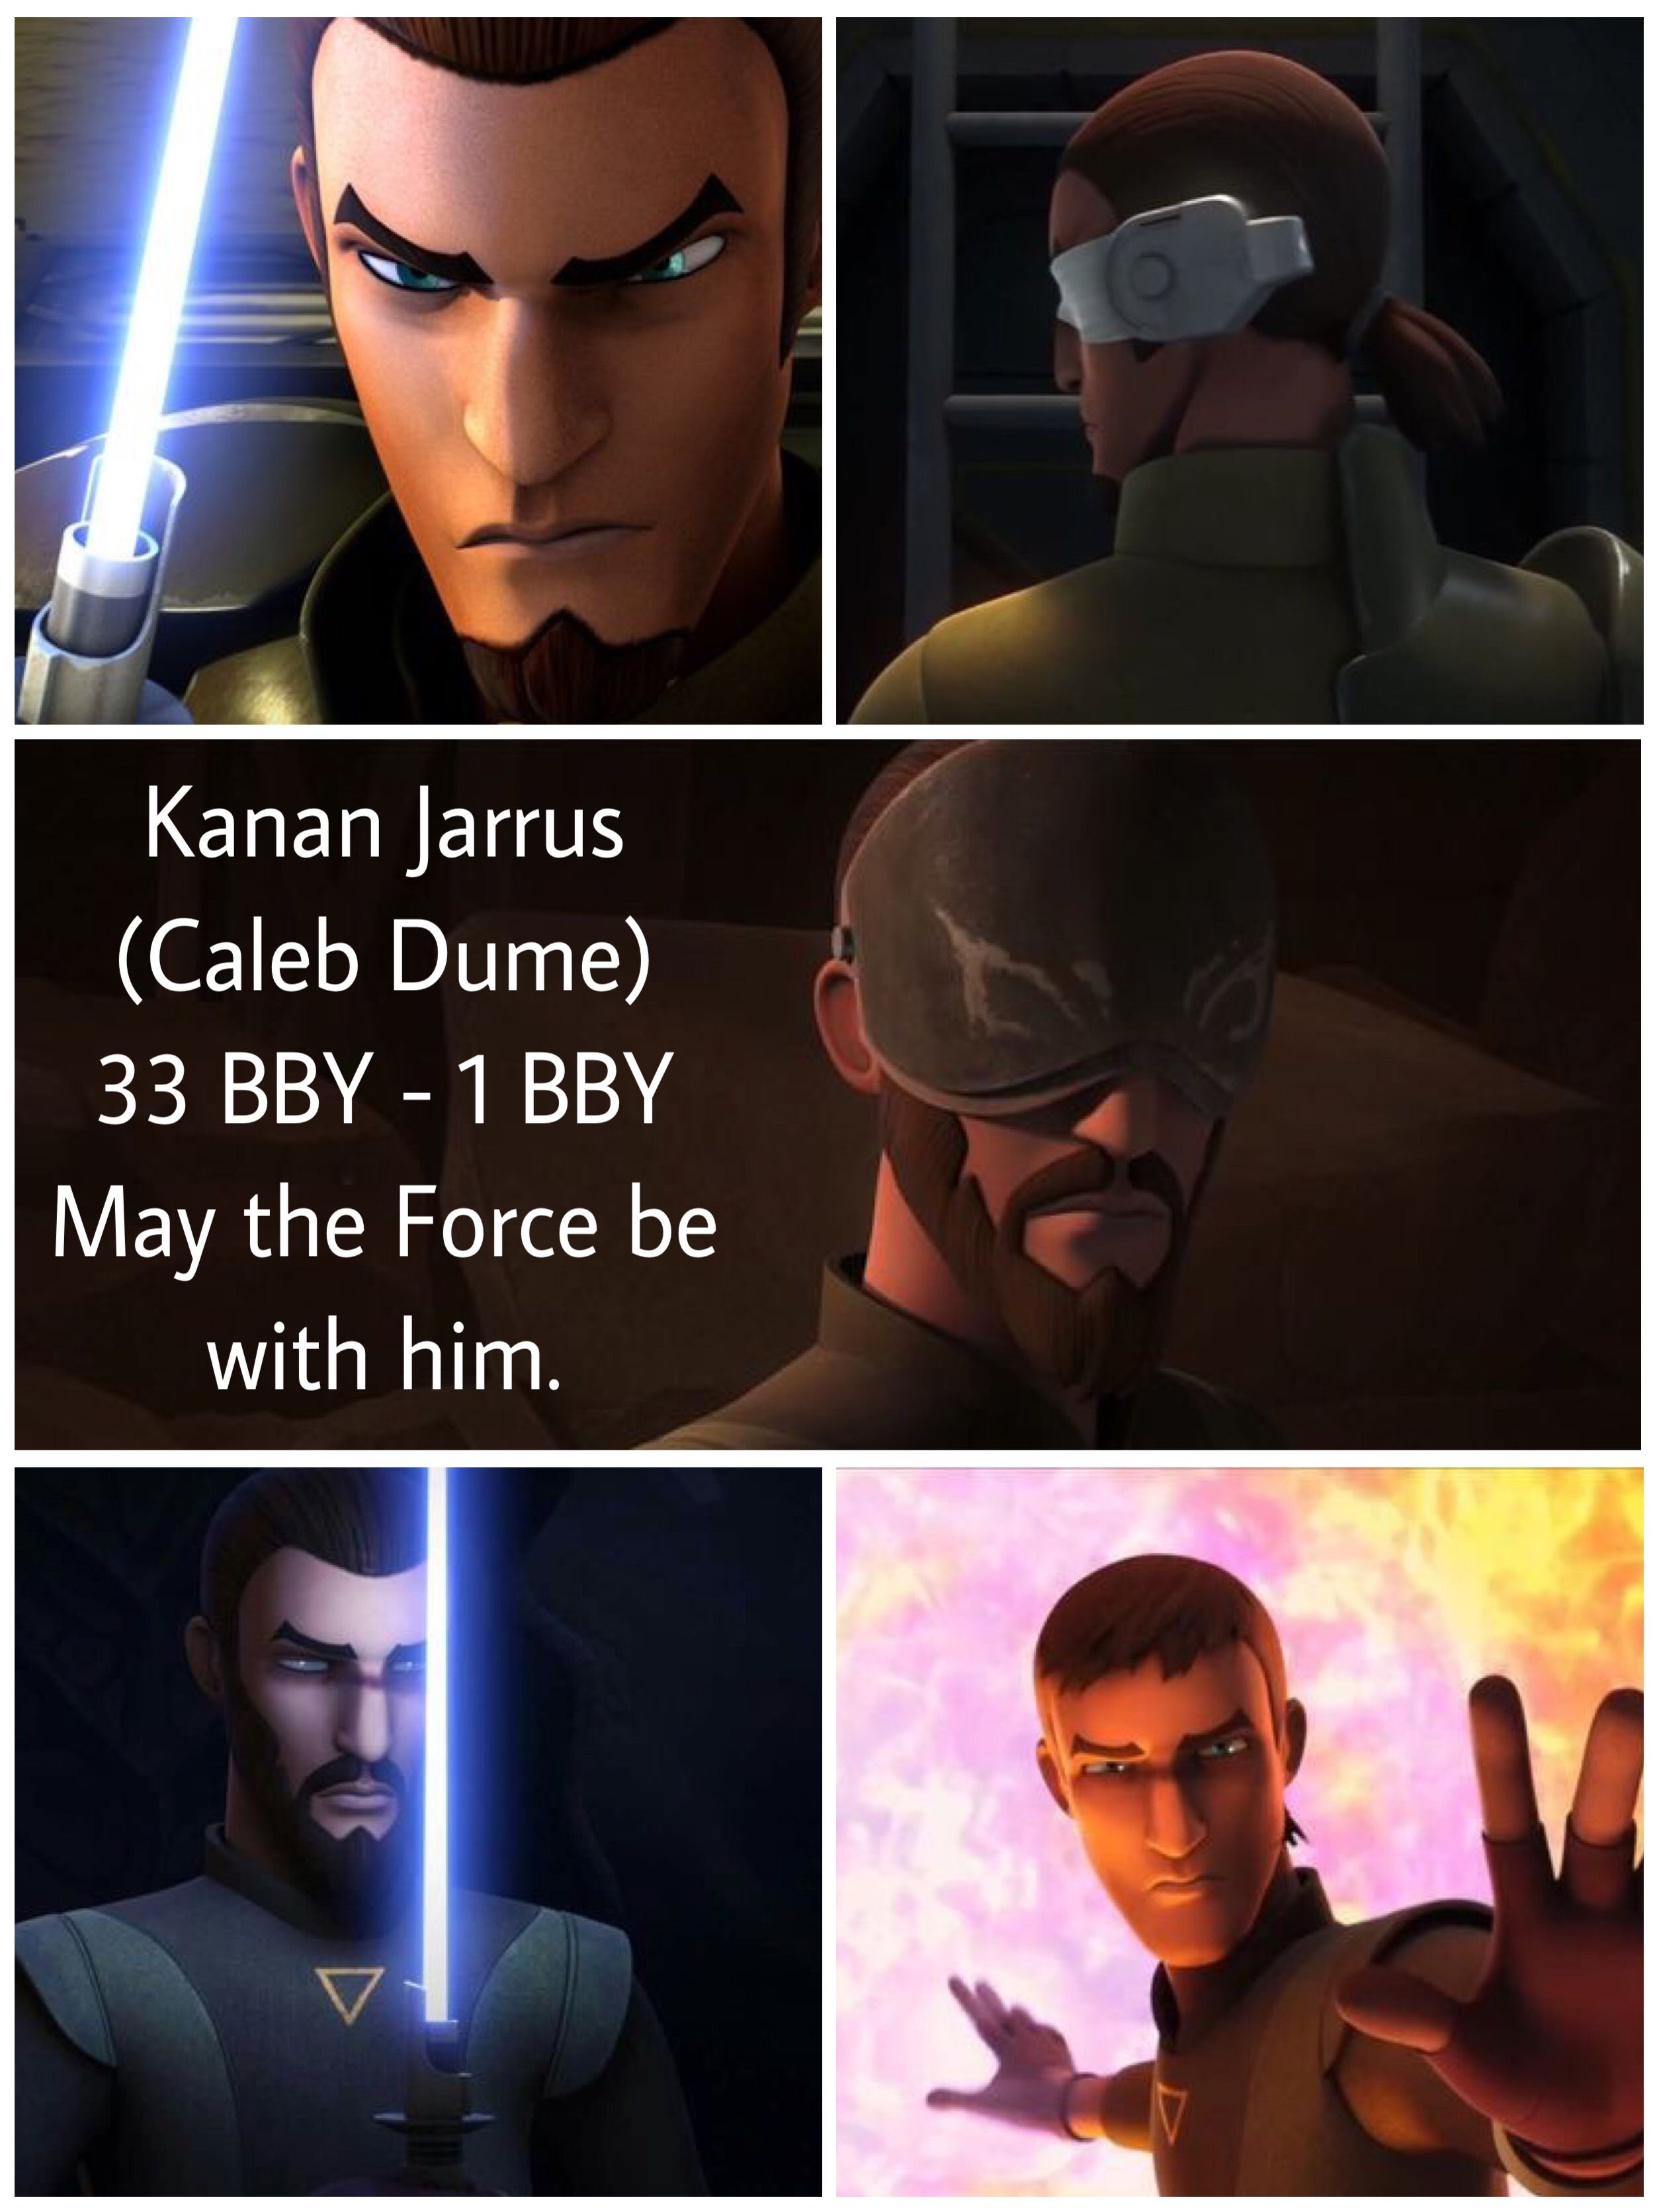 May the Force be with you, Kanan Jarrus_  Star Wars Rebels.jpeg